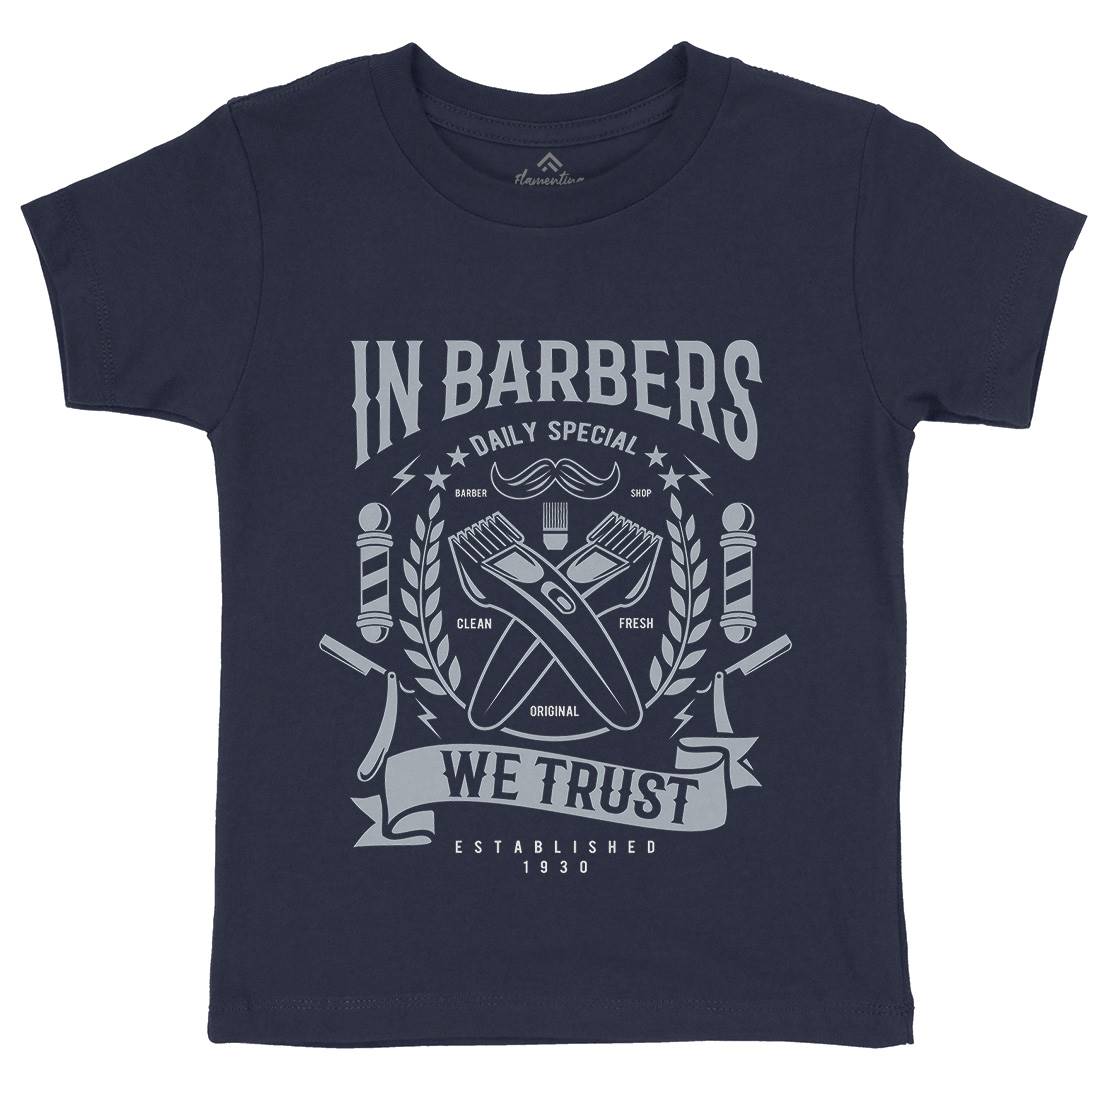 In Barbers We Trust Kids Crew Neck T-Shirt Barber A070